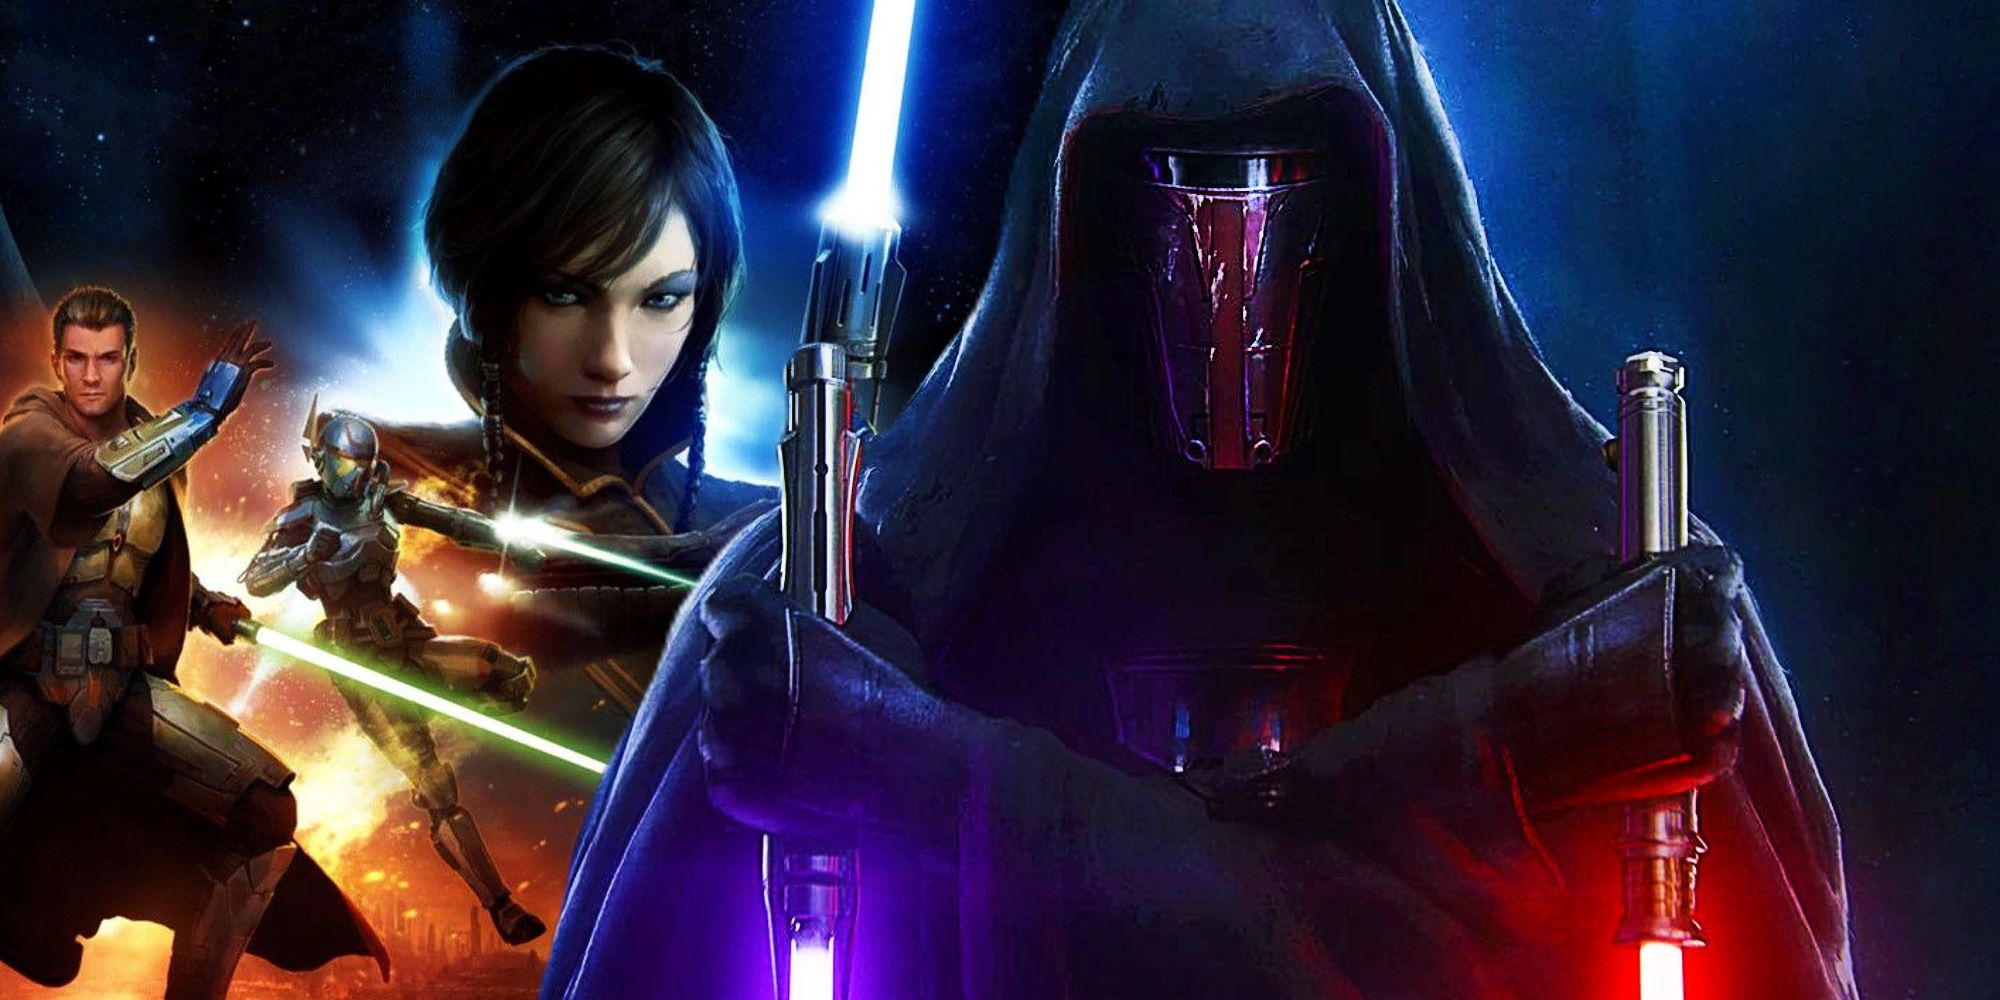 The poster for Knights of the Old Republic and Darth Revan holding two lightsabers